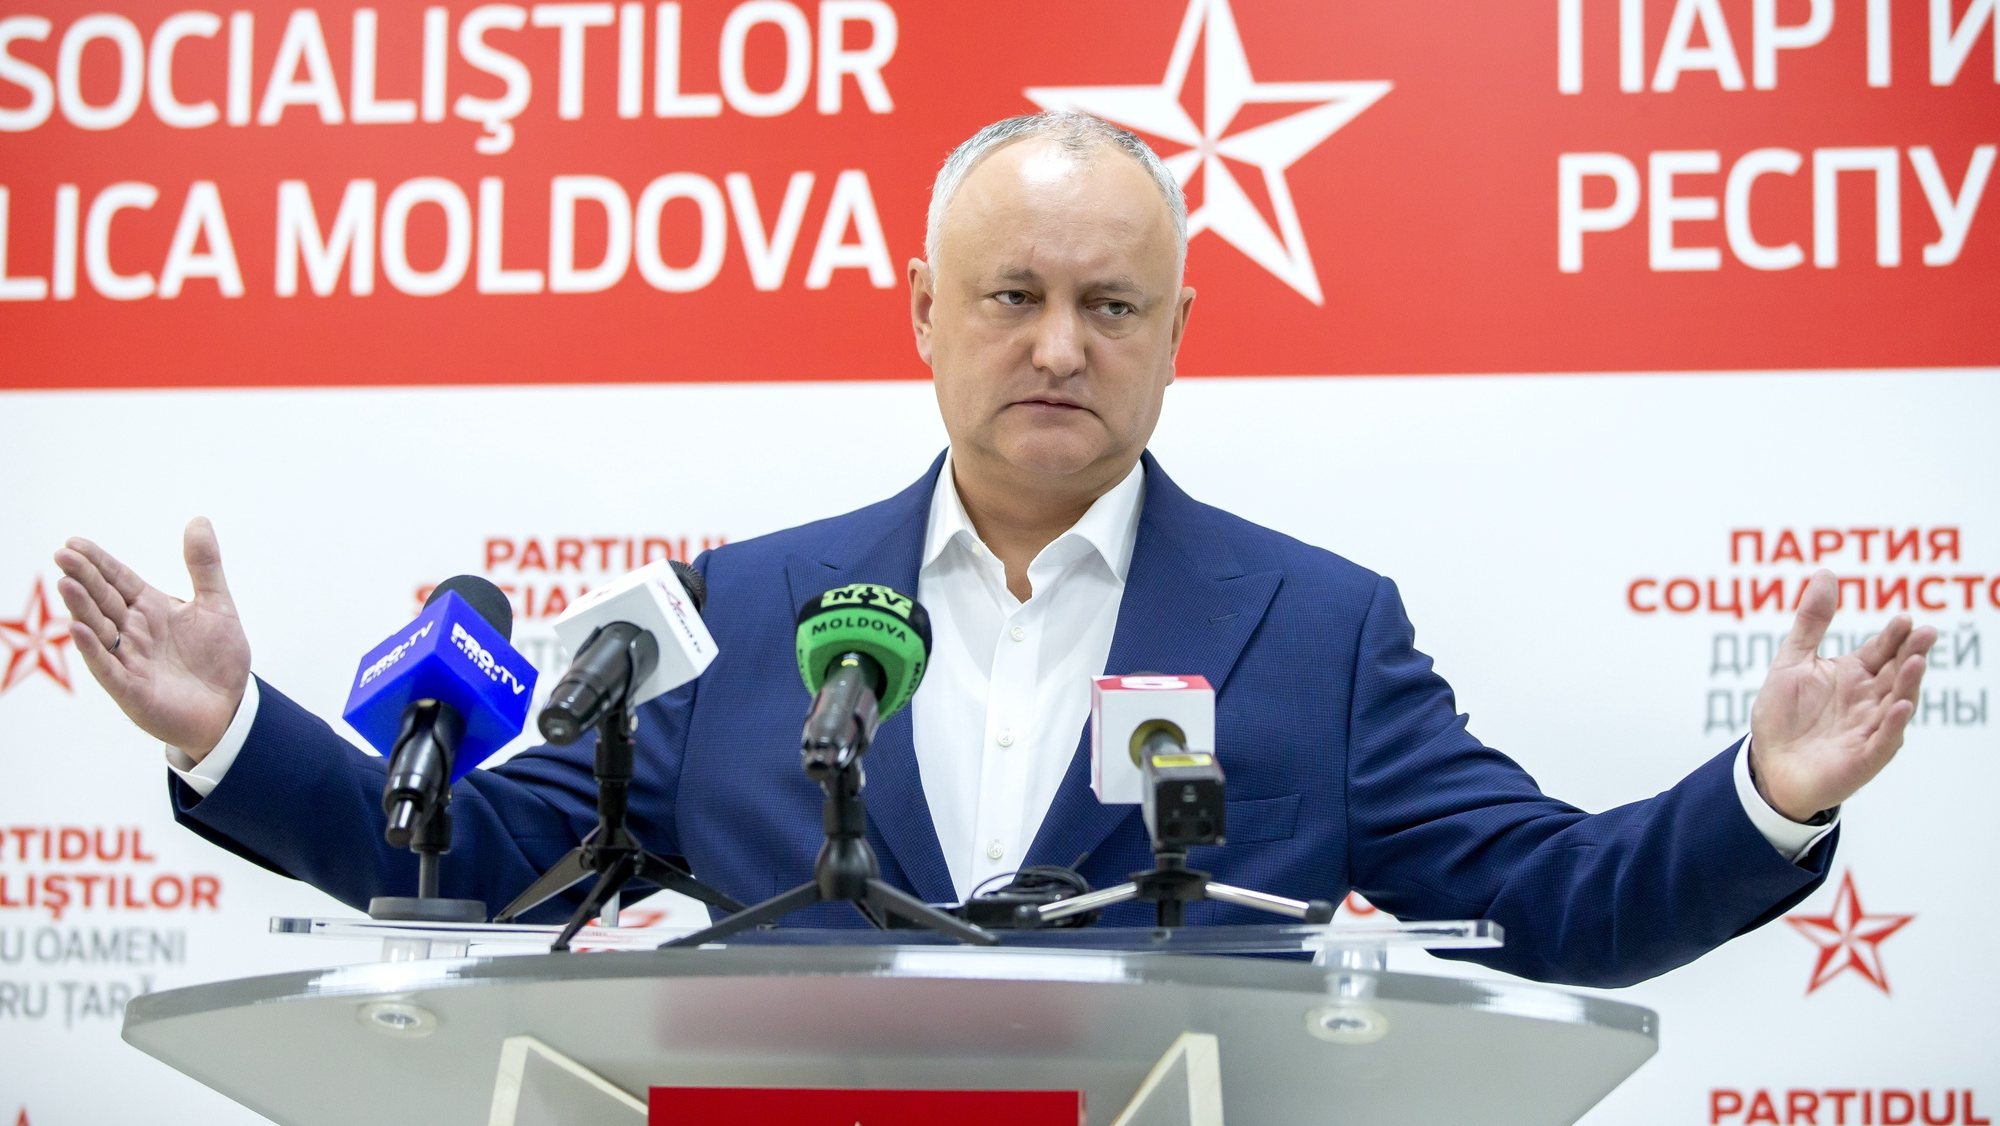 epa09513175 Moldovan former president Igor Dodon, leader of the Socialists and Communists block, gestures during a press conference at the headquarters of his party in Chisinau, Moldova, 08 October 2021. Dodon accuses the government of abuse of power and the manner of arresting the General Prosecutor, and calls on people to protest the government&#039;s undemocratic and dictatorial methods and inaction in addressing economic and energy threats.  EPA/DUMITRU DORU